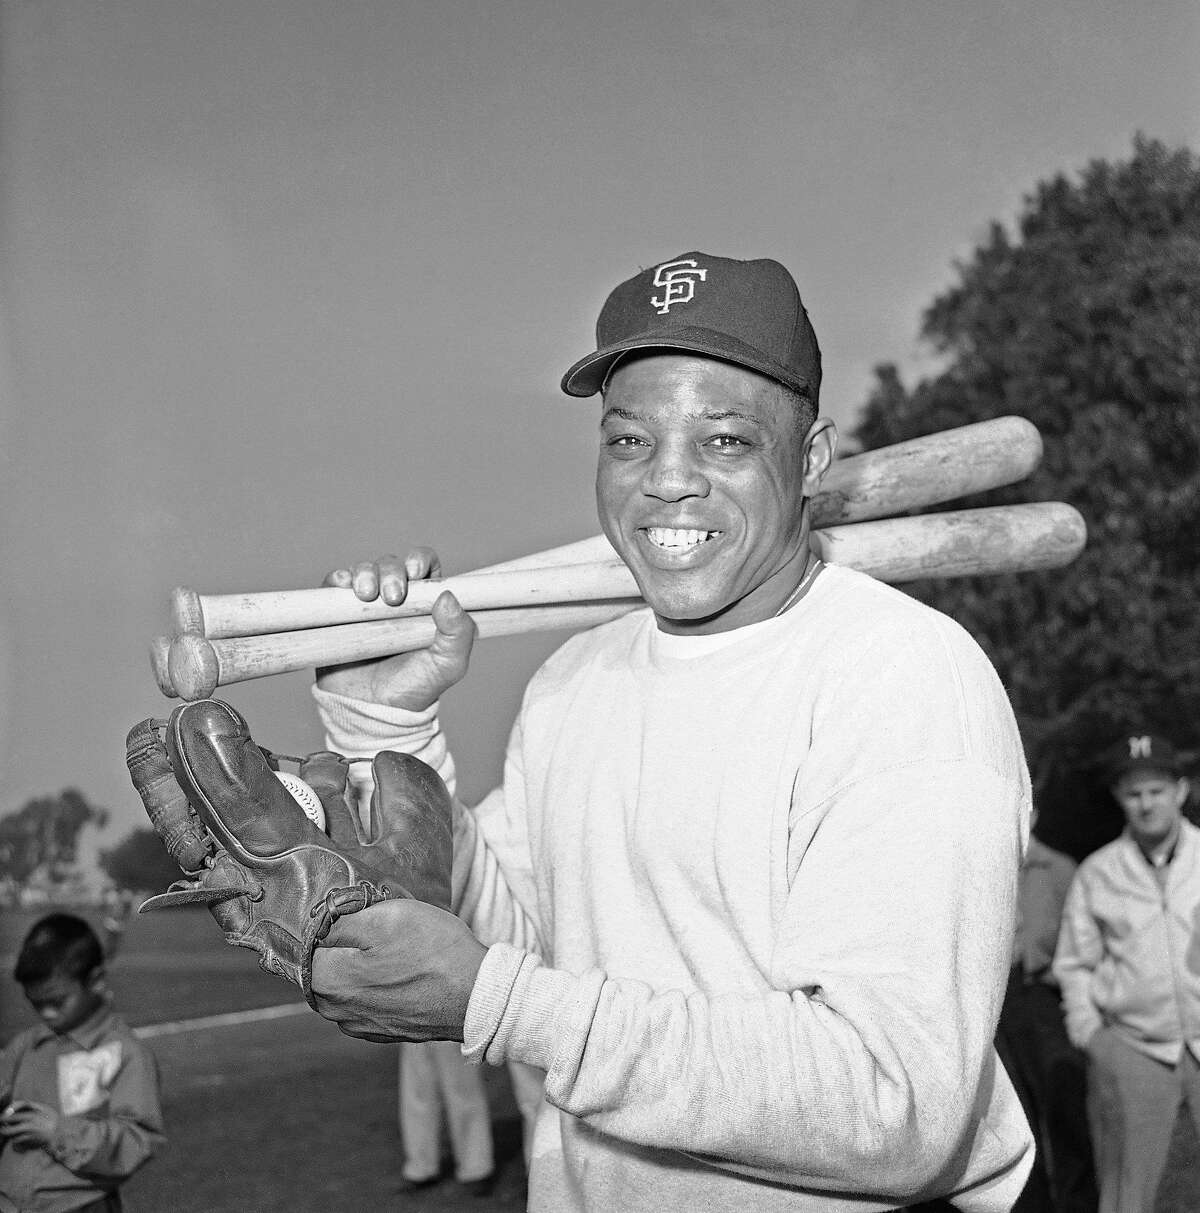 Willie Mays, star outfielder for the San Francisco Giants, arrives on Feb. 4, 1962 at a San Francisco public playground equipped for a workout on his own. Mays, who recently signed a Giants contract for an estimated $90,000 largest in Giants history, said he wanted to limber up some as spring training is just around the corner.